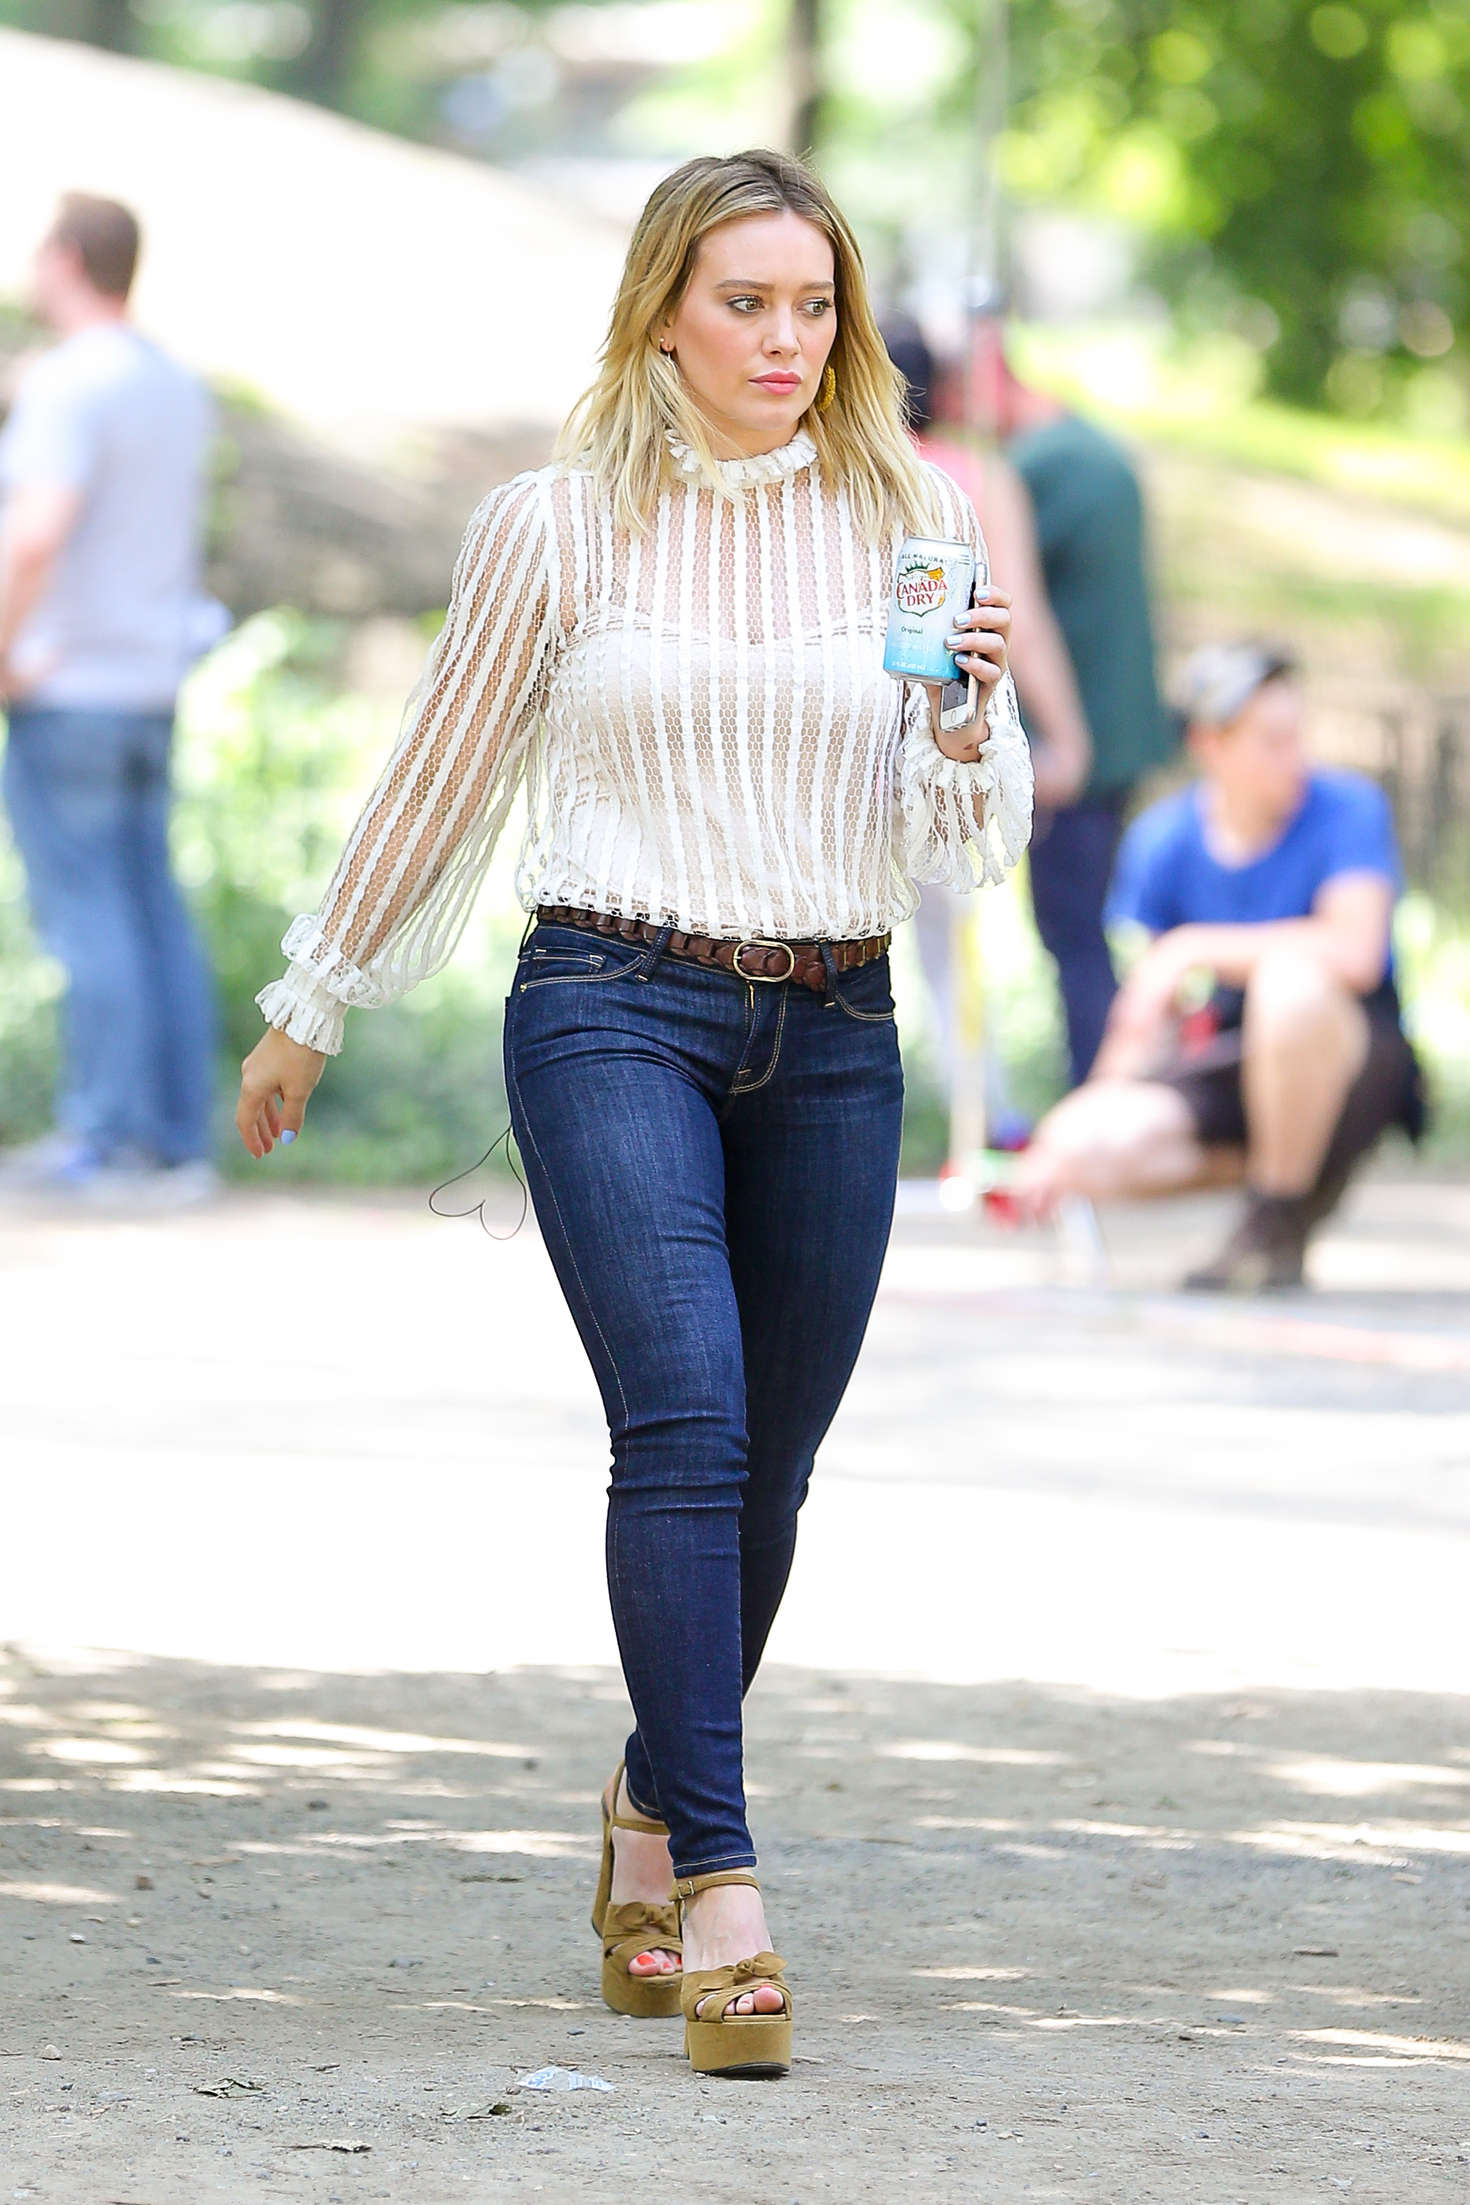 Hilary Duff 2016 : Hilary Duff Booty in Tight Jeans -01. 